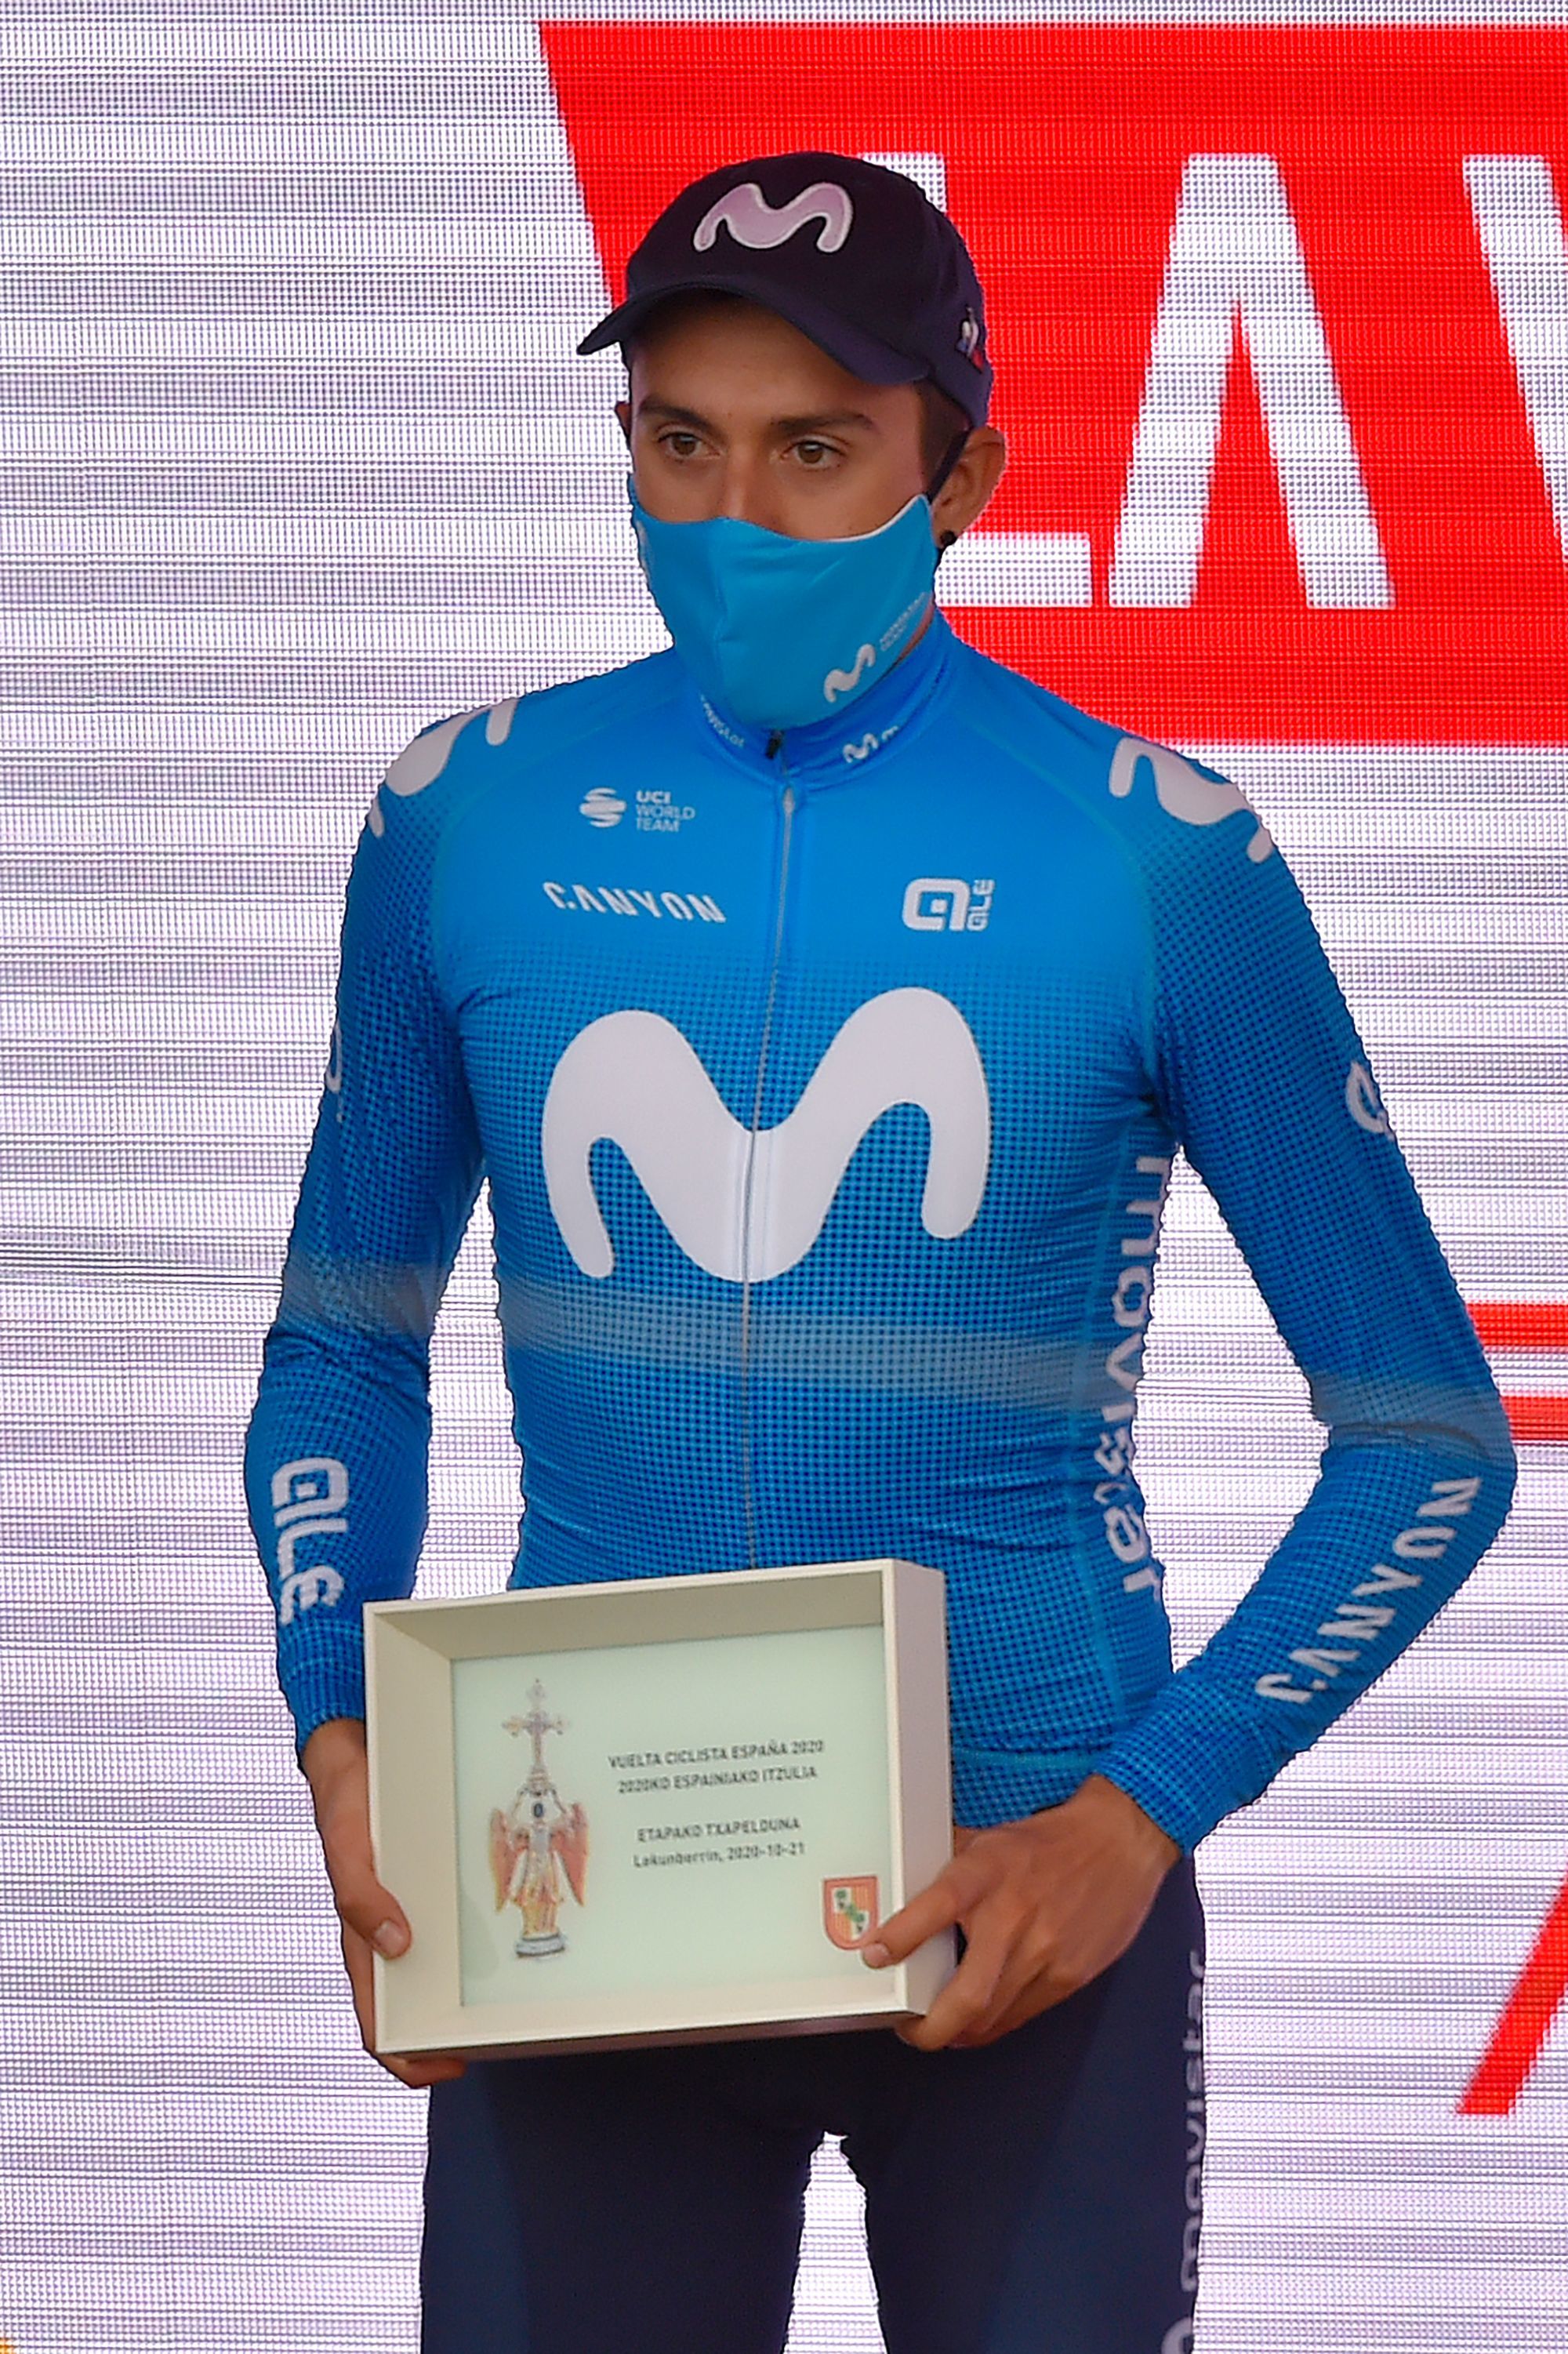 Team Movistar's Spanish rider lt;HIT gt;Marc lt;/HIT gt; lt;HIT gt;Soler lt;/HIT gt; celebrates on the podium after winning the 2nd stage of the 2020 La Vuelta cycling tour of Spain, a 151,6-km race from Pamplona to Lekunberri, on October 21, 2020. (Photo by ANDER GILLENEA / AFP)